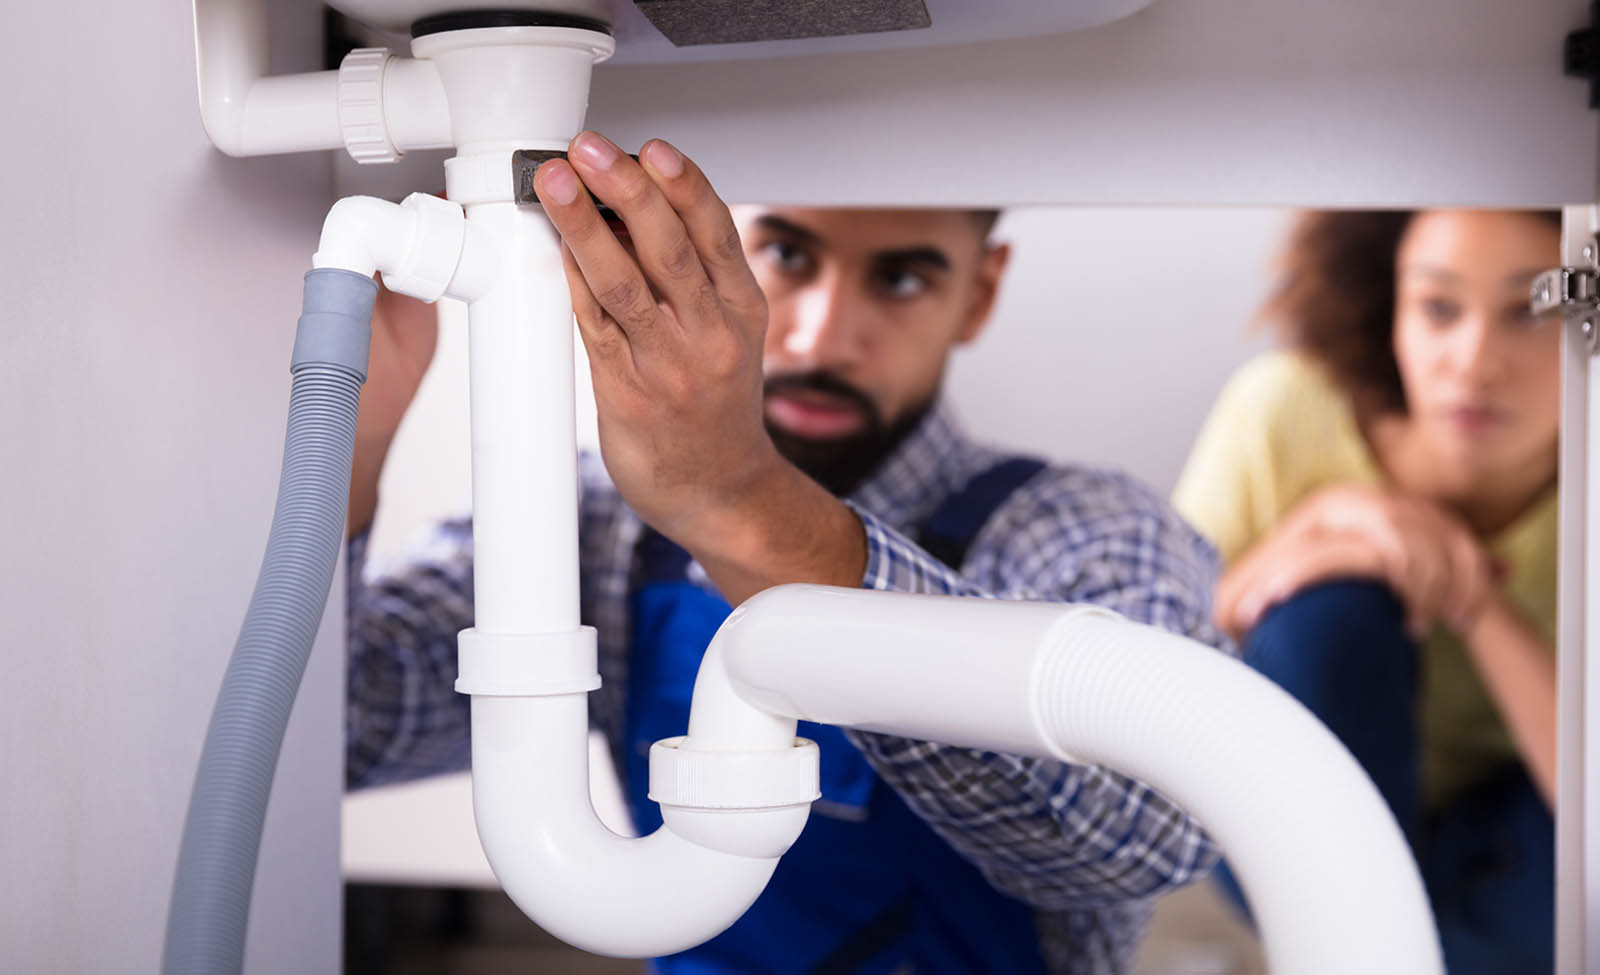 How to Find Home Insurance that Covers Plumbing